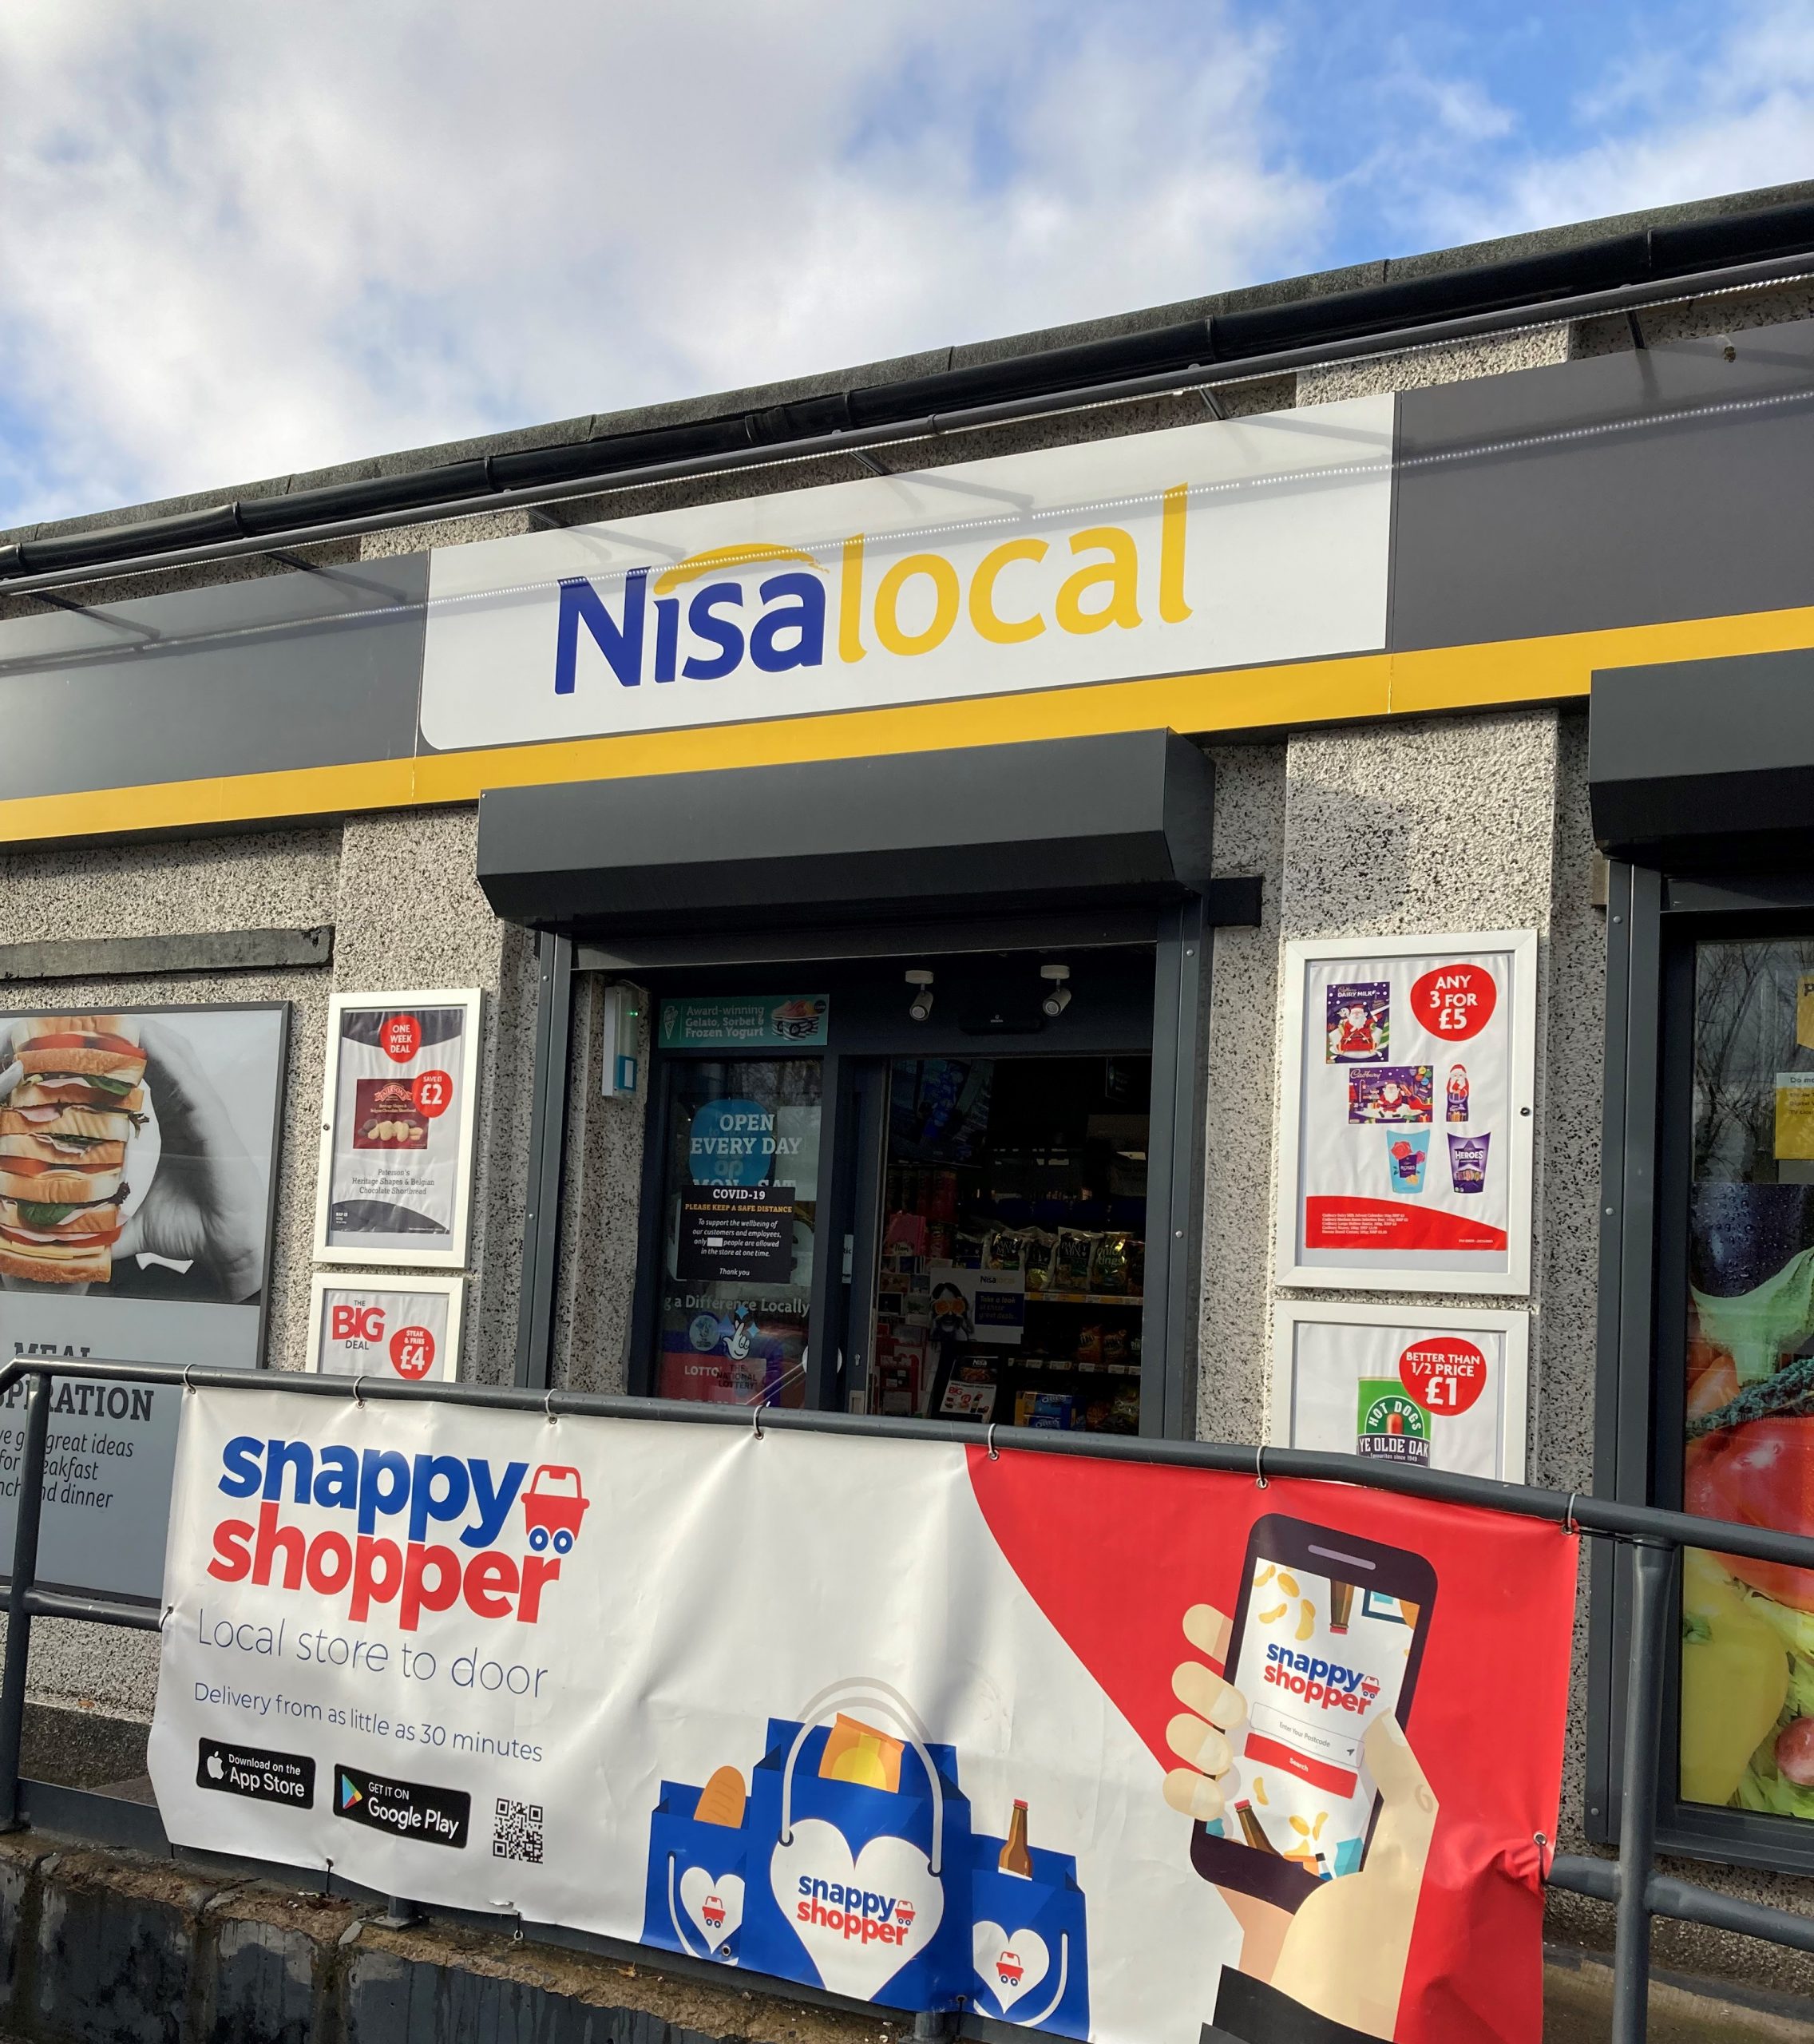 Nisa improved sales for retailers via delivery services in 2021